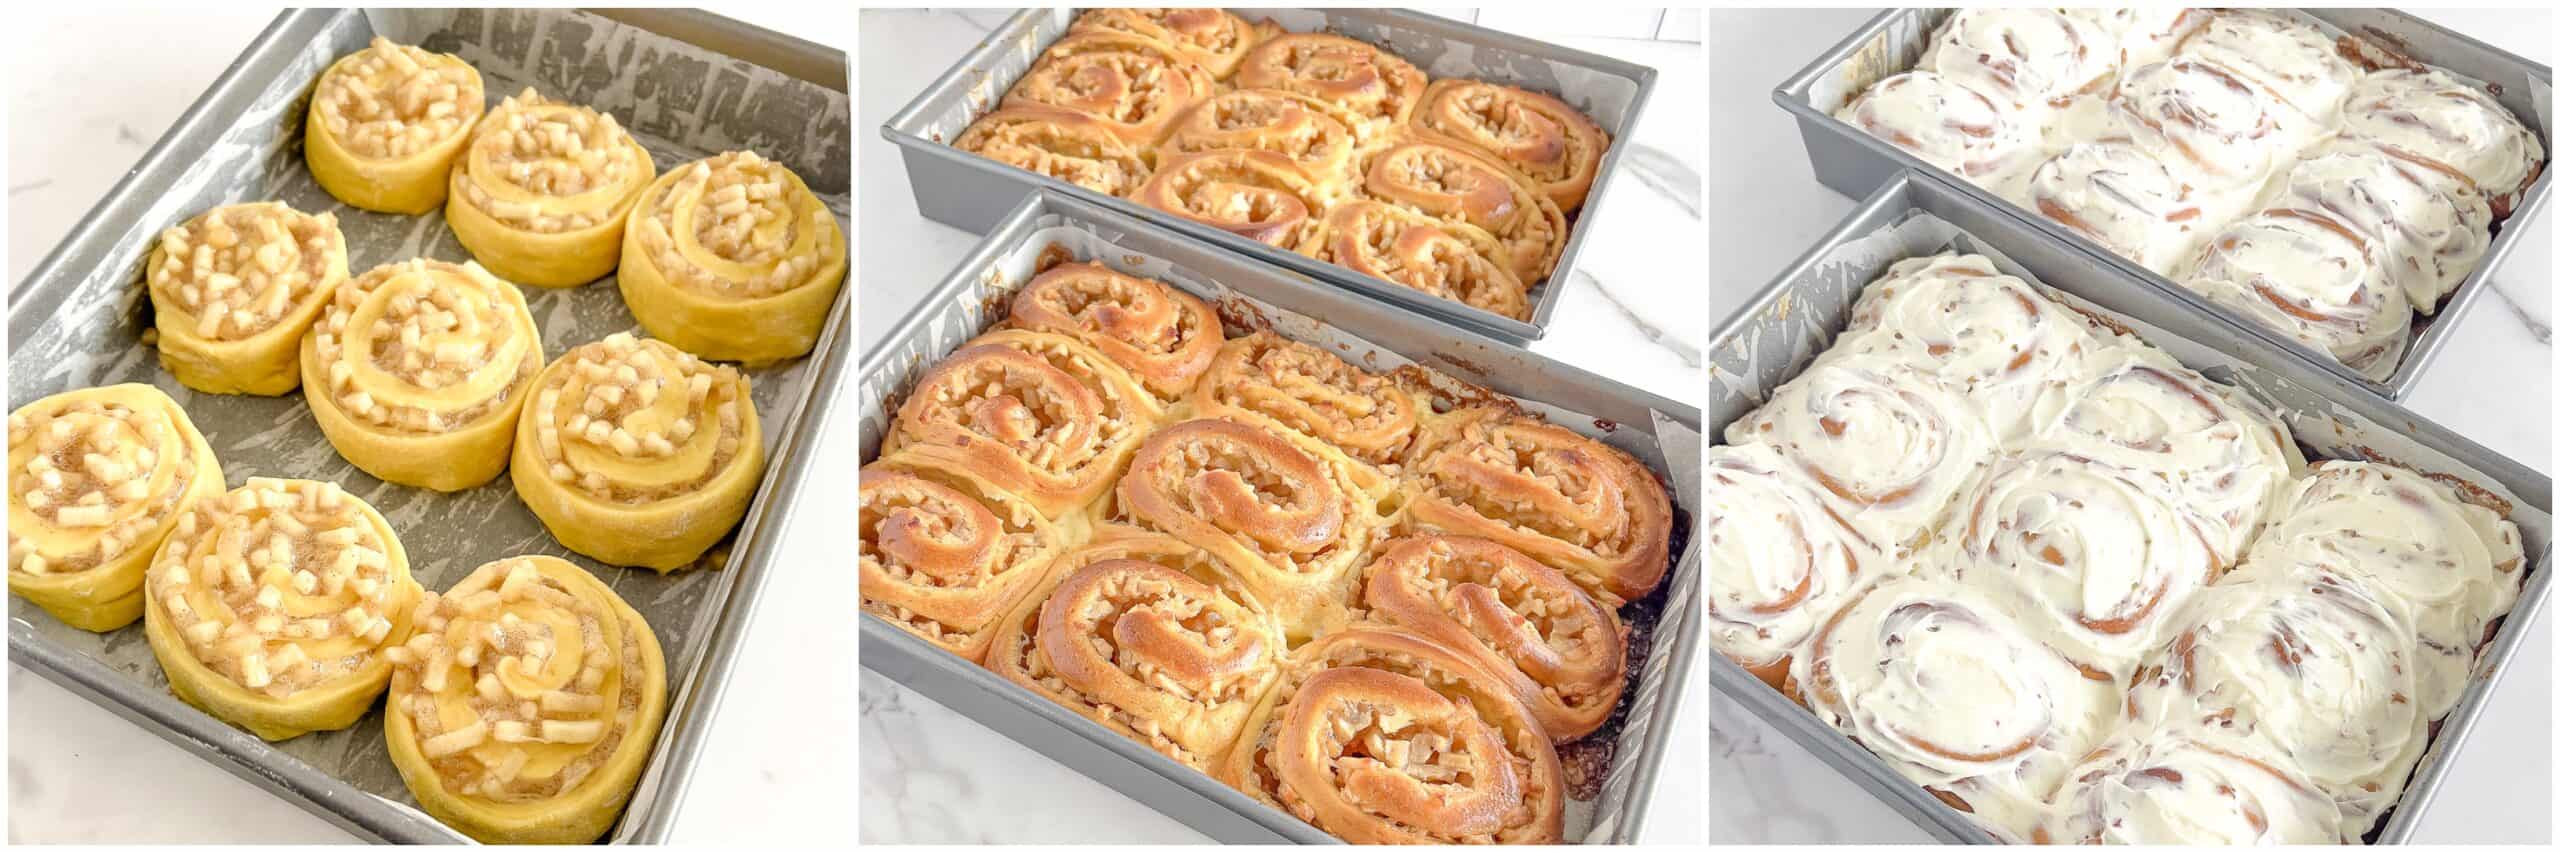 Once the rolls have cooled, spread your homemade frosting over each roll.